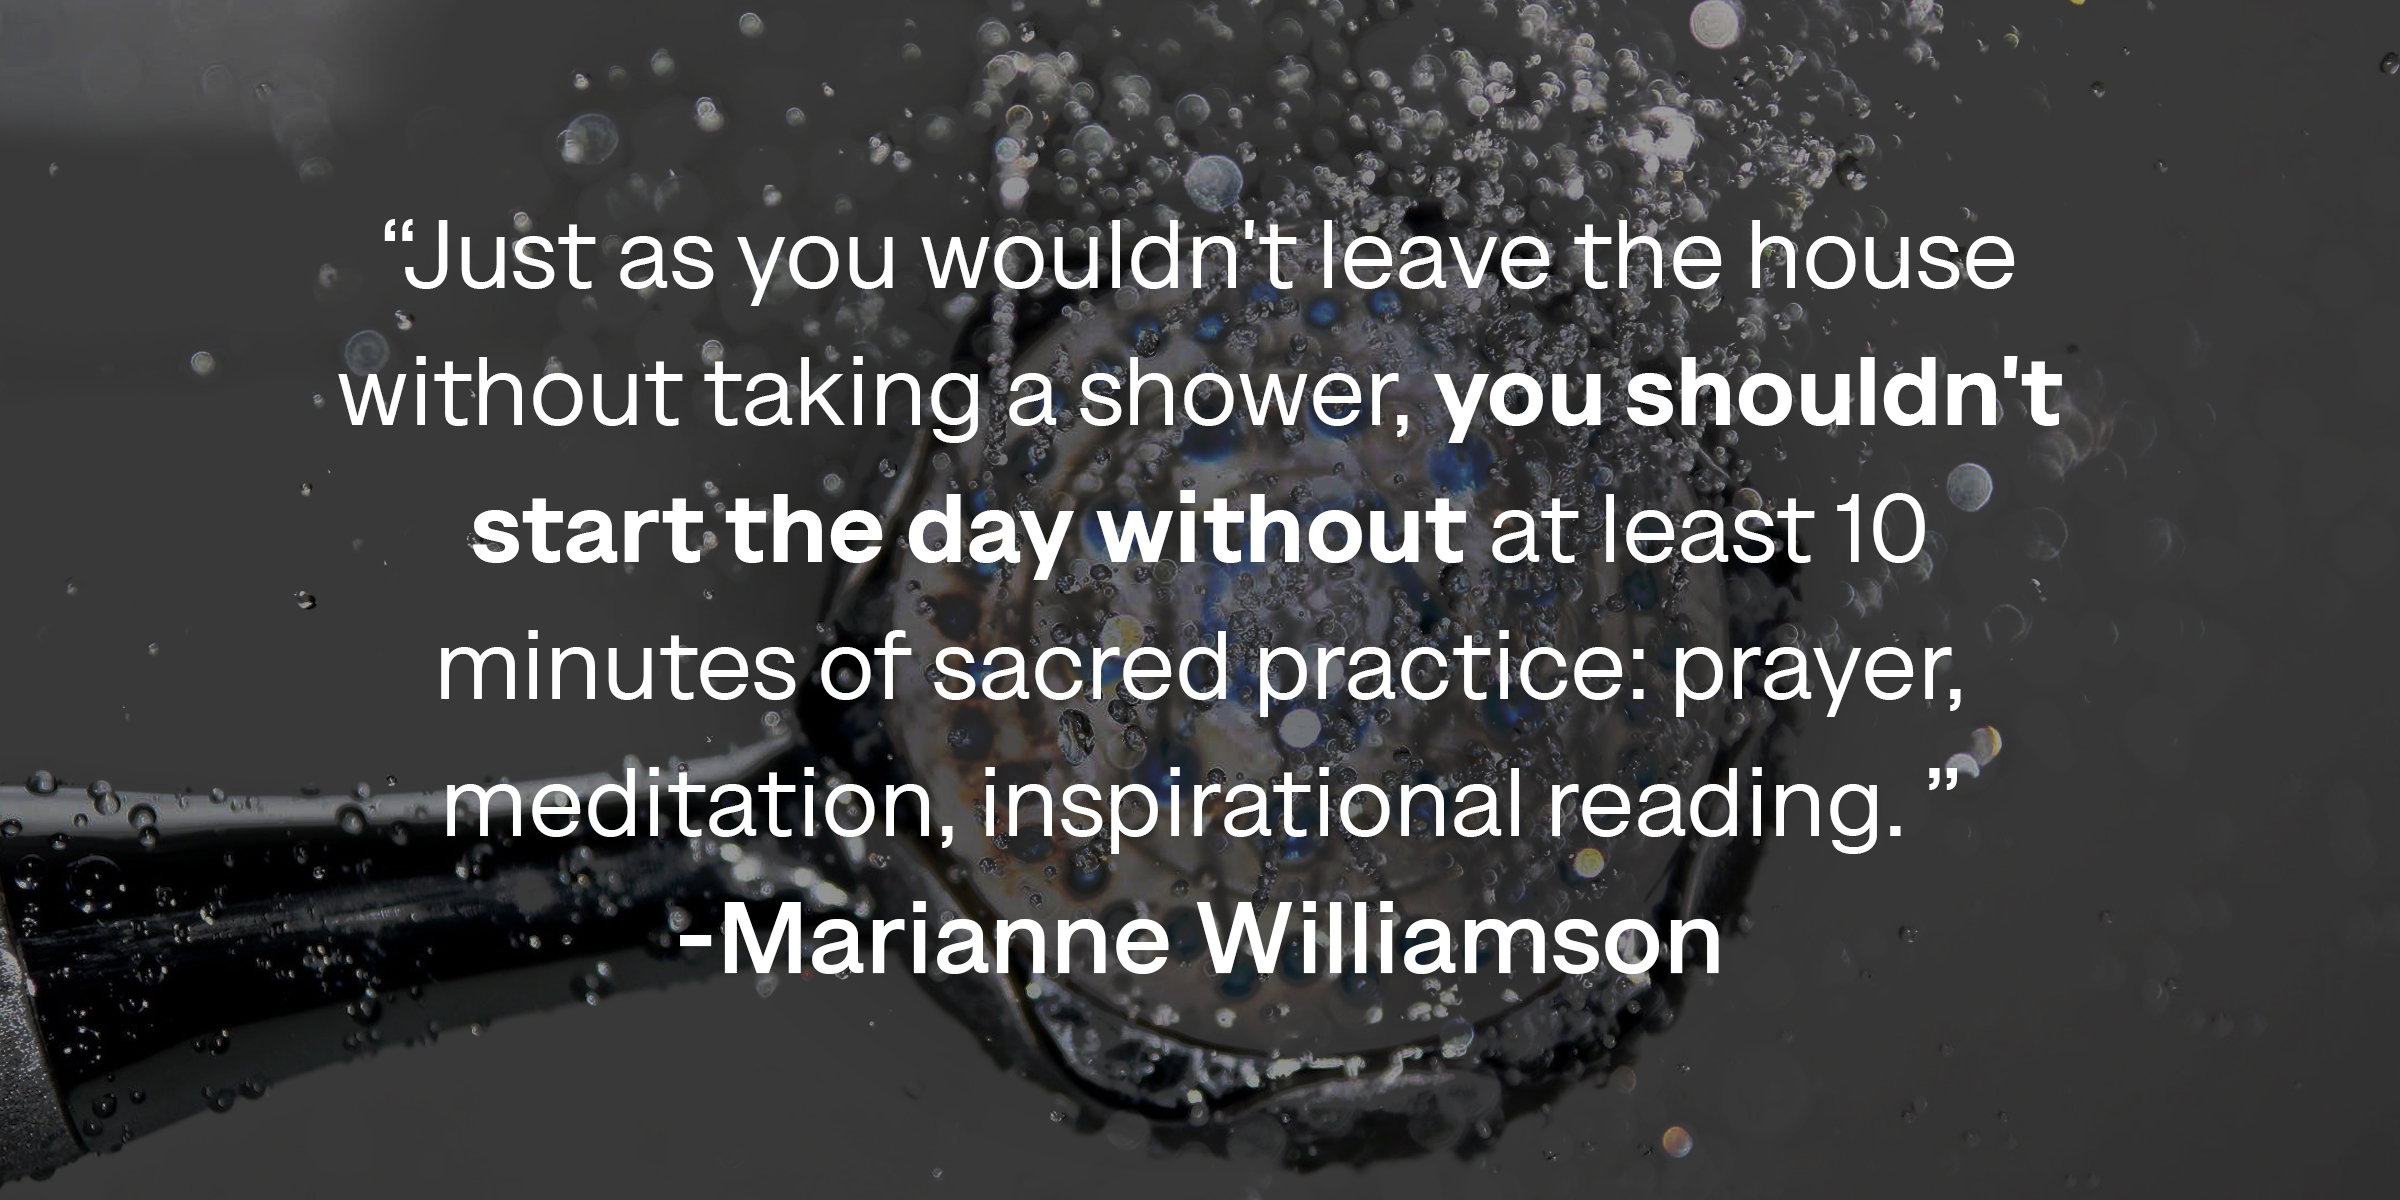 Marianne Williamson's quote: "Just as you wouldn't leave the house without taking a shower, you shouldn't start the day without at least 10 minutes of sacred practice: prayer, meditation, inspirational reading." | Source: Azquotes